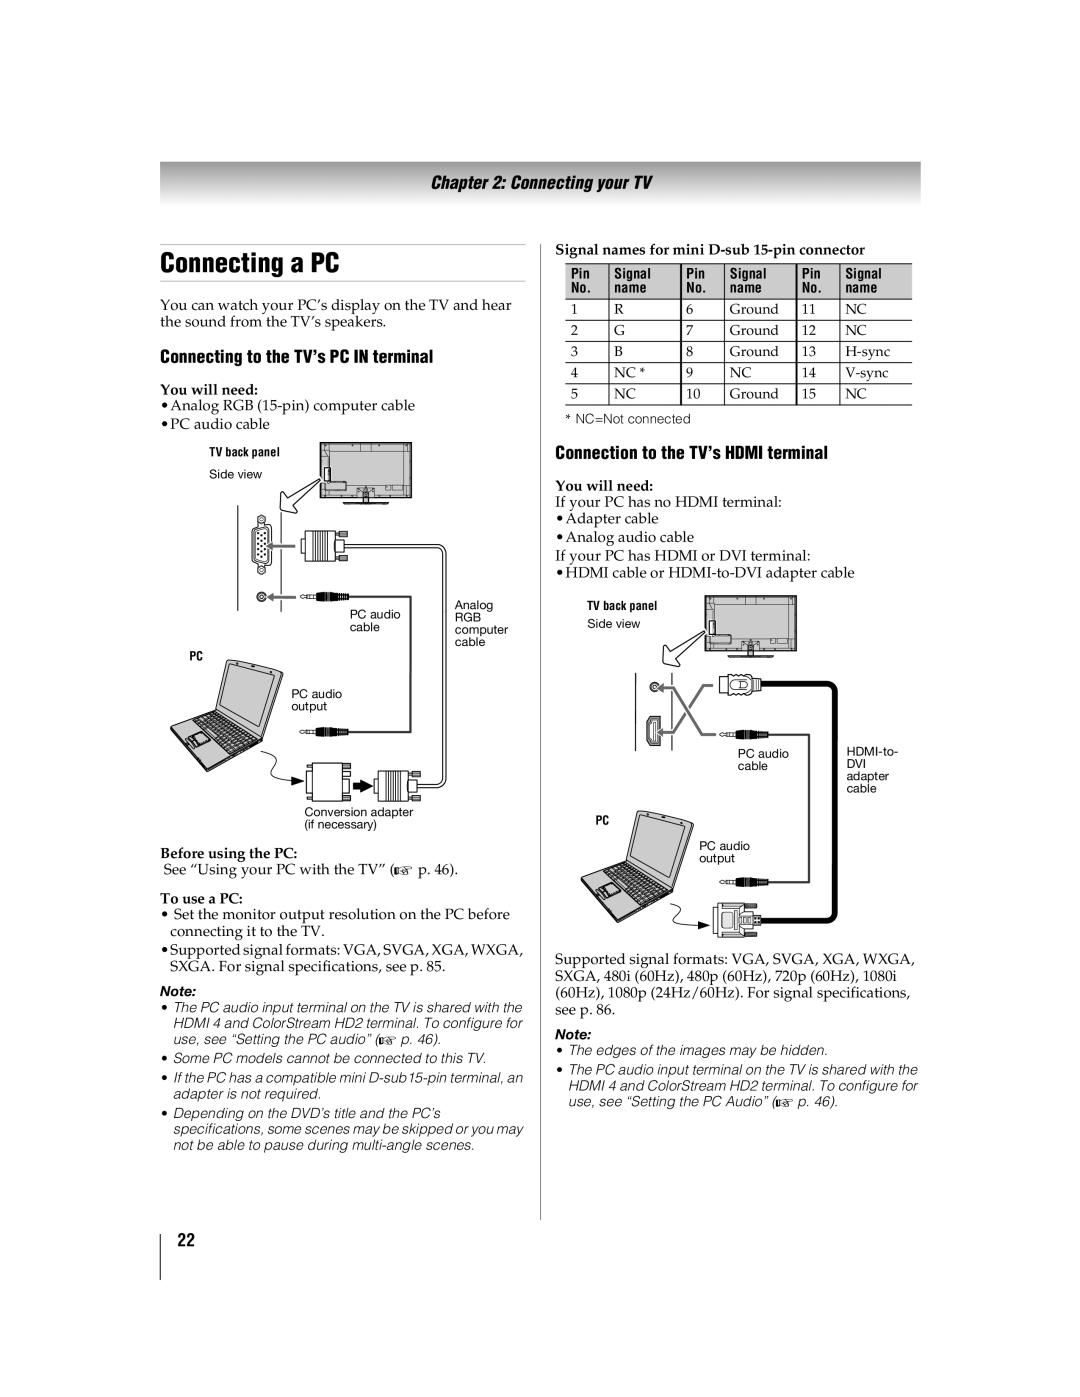 Toshiba 46WX800U Connecting a PC, Connecting to the TV’s PC IN terminal, Connection to the TV’s HDMI terminal, To use a PC 